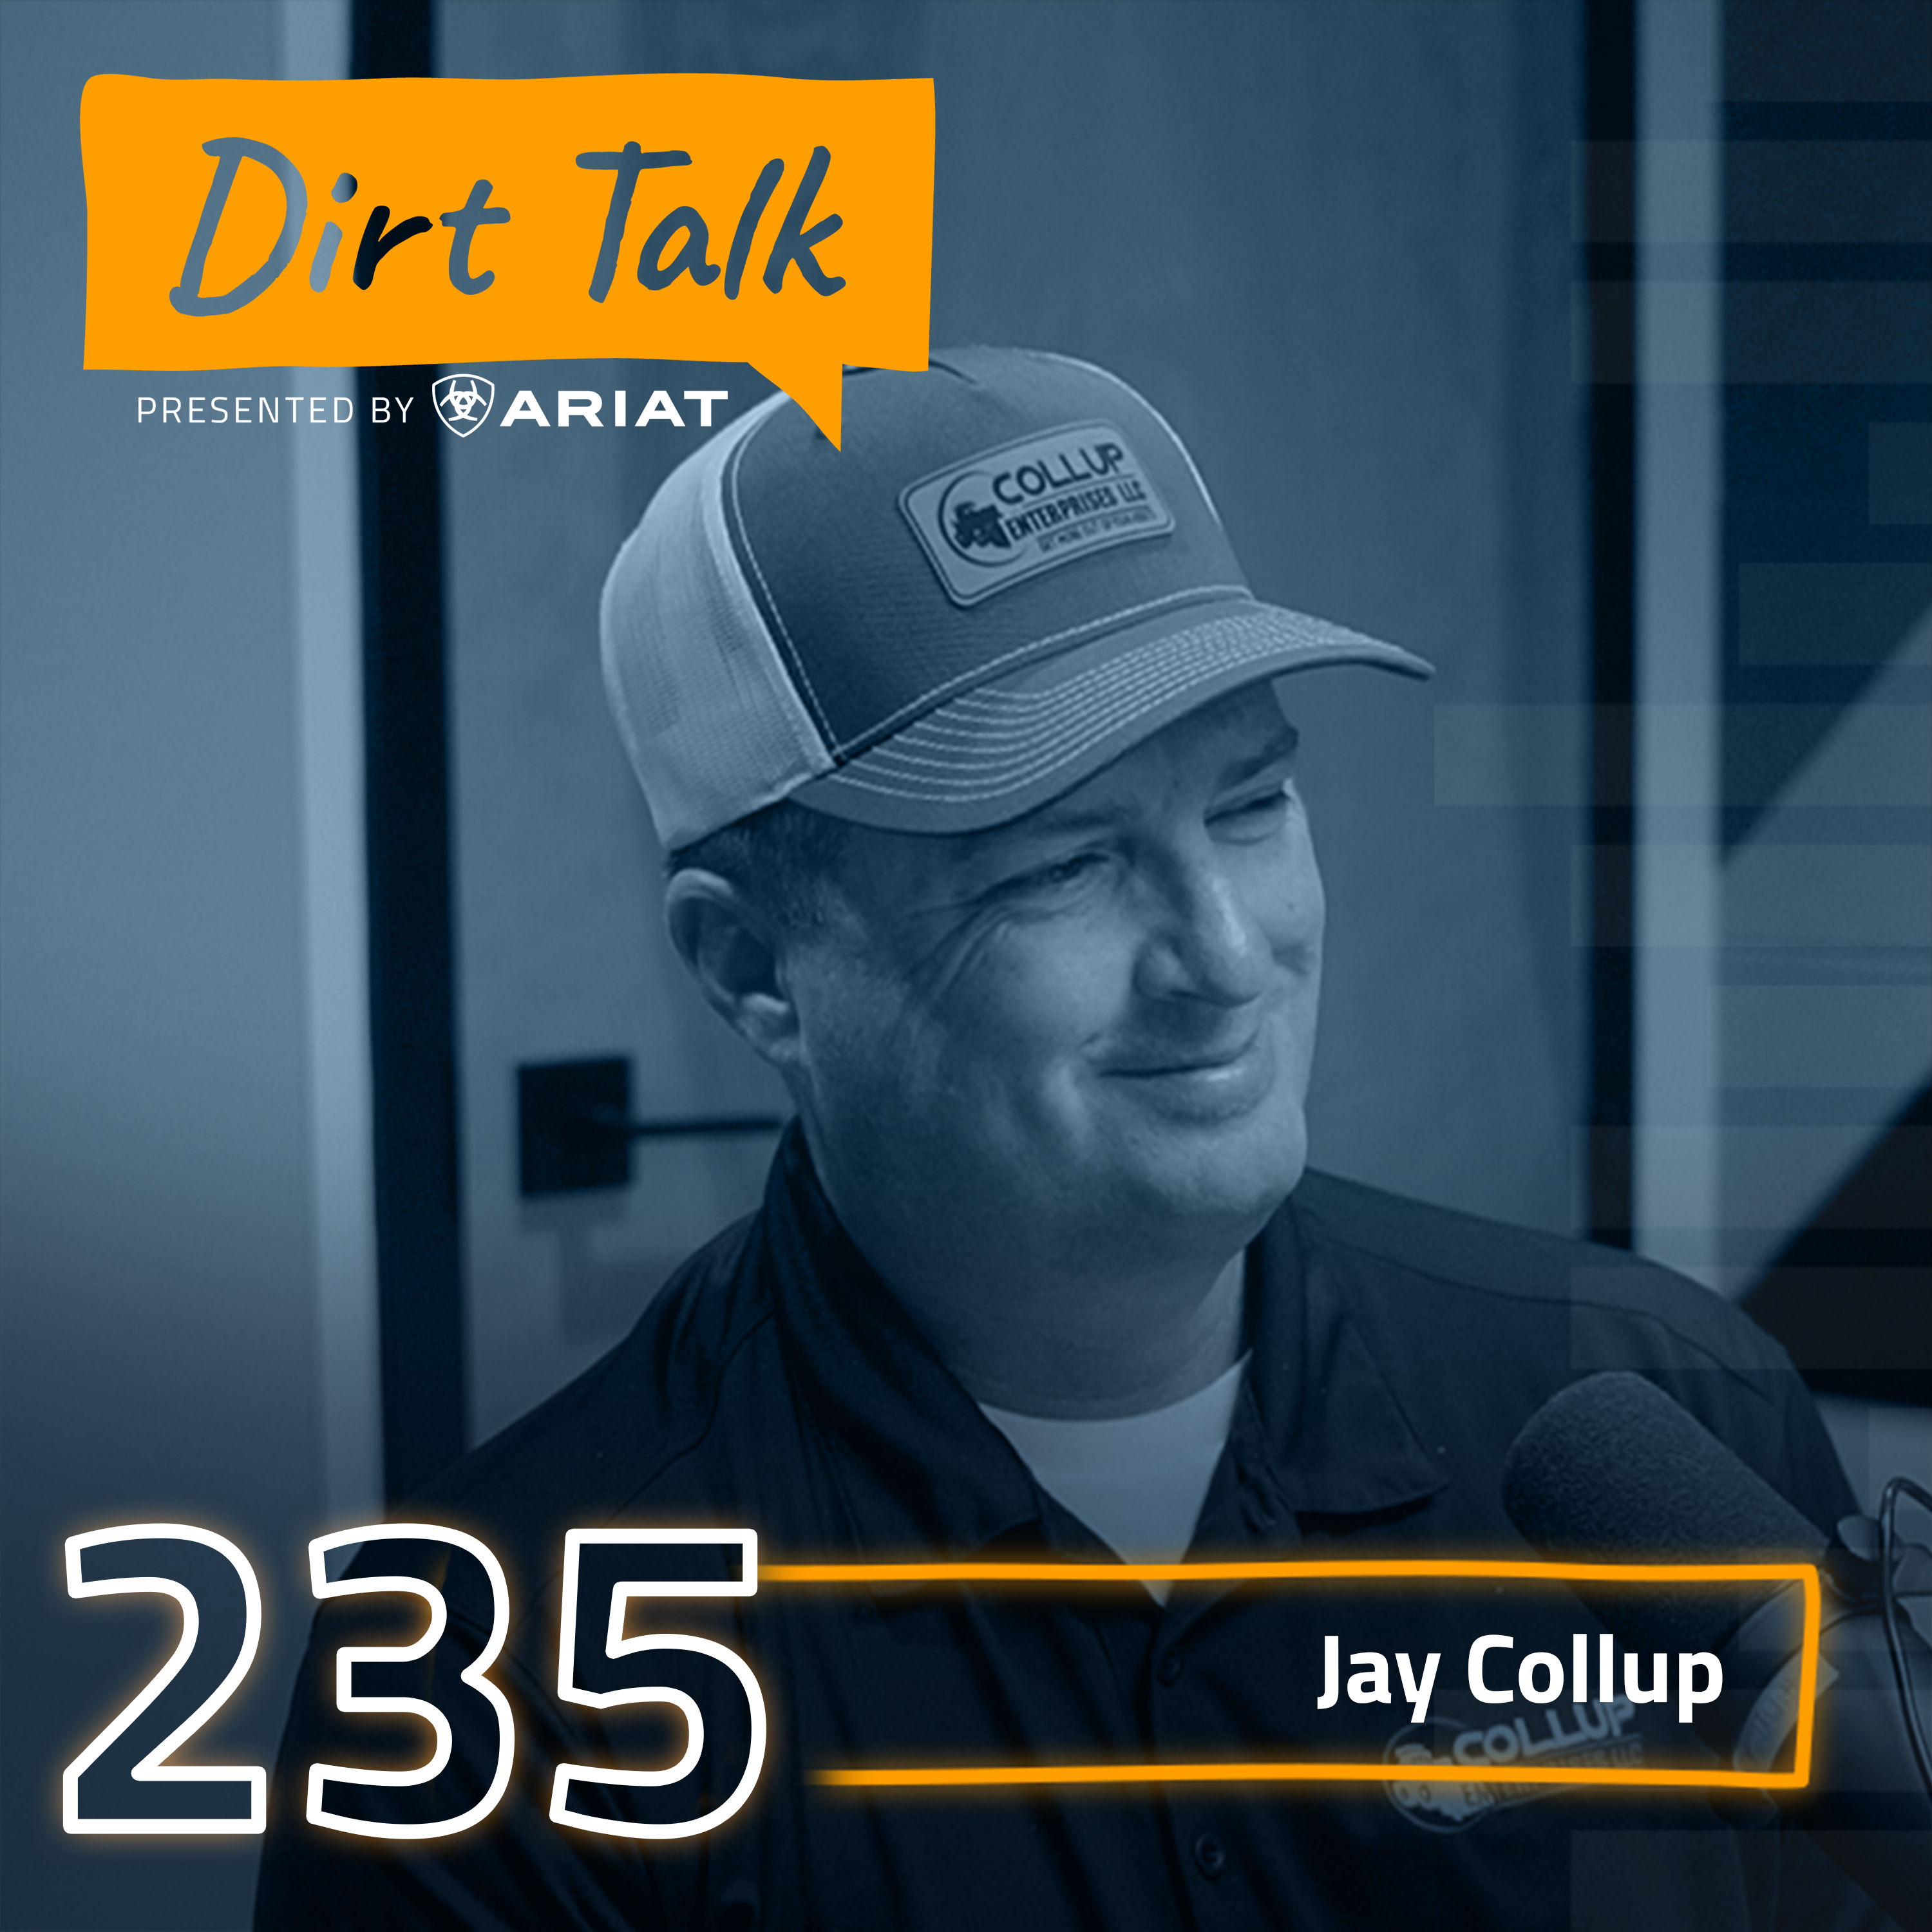 Training Advice From an Ace Operator Featuring Jay Collup